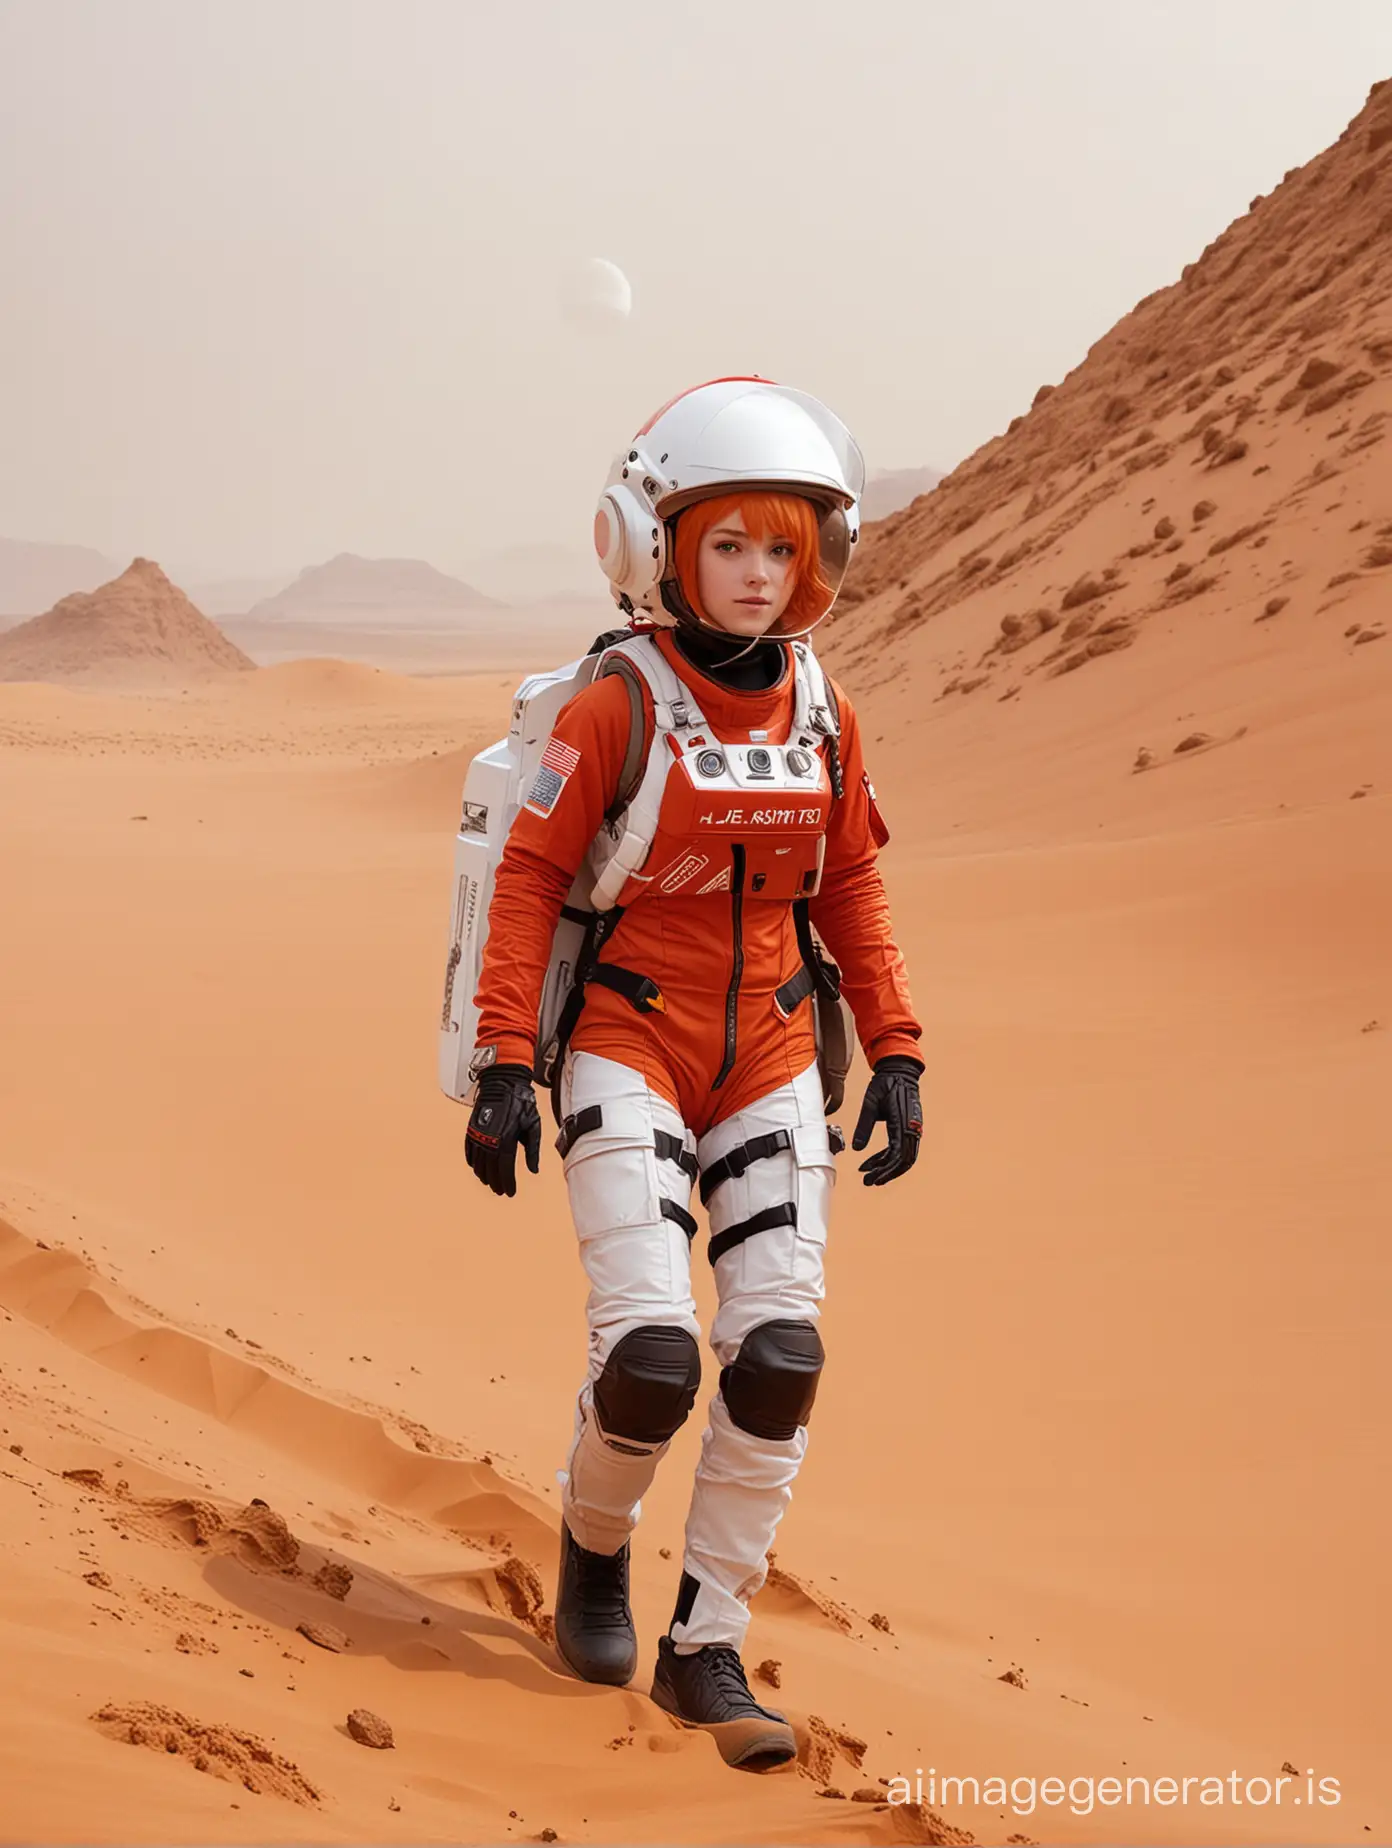 Short Orange haired anime girl, wearing a red spaceship, with a white helmet (clear visor) and white backpack, riding the curiosity rover across a martian sand dune. Sandstorm background.